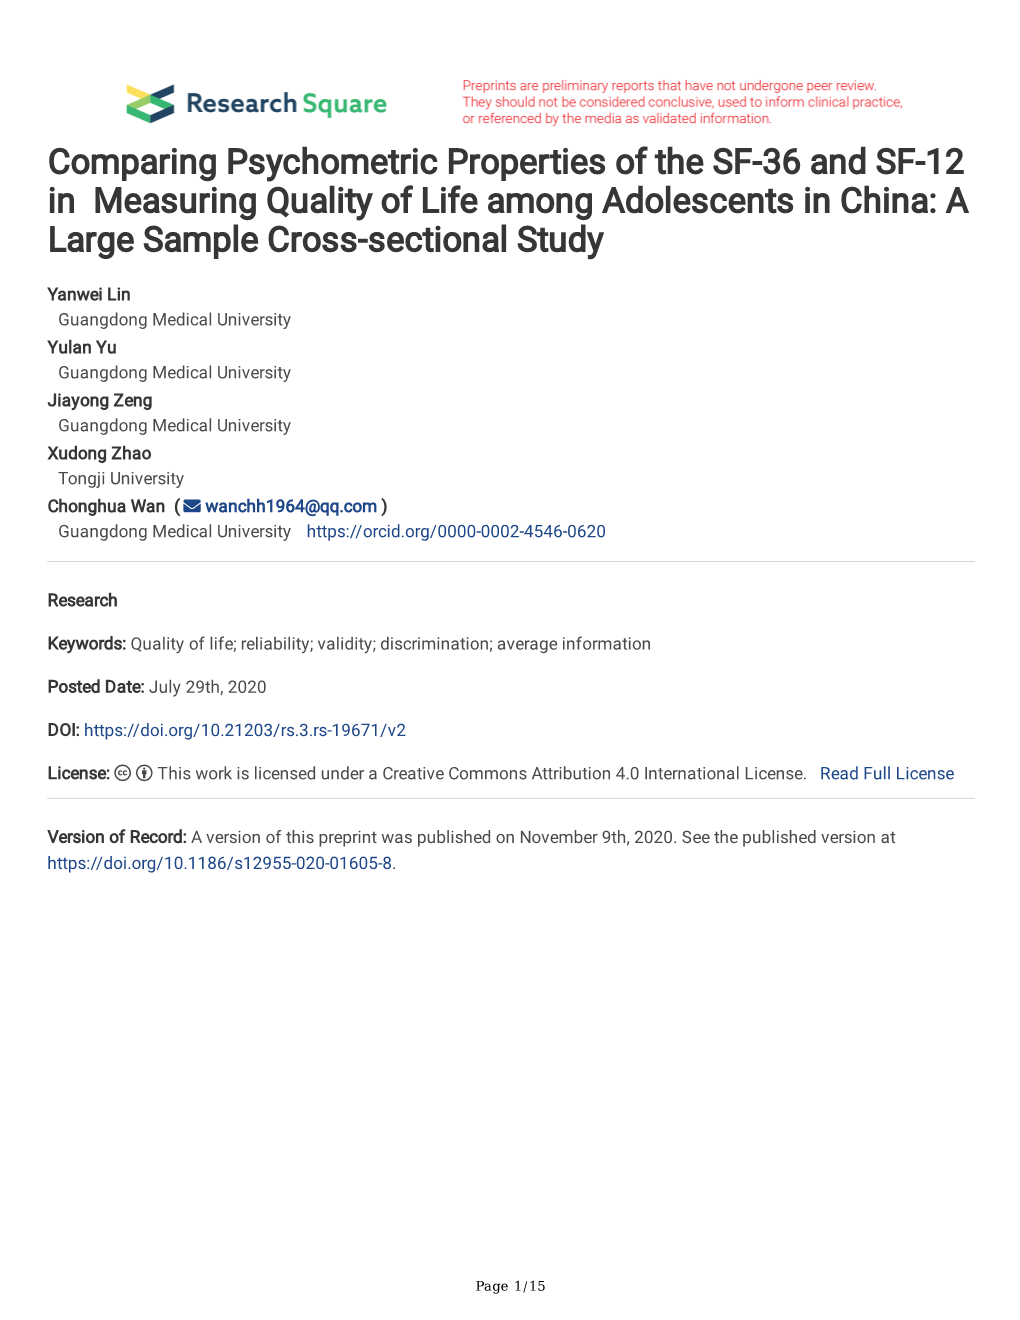 Comparing Psychometric Properties of the SF-36 and SF-12 in Measuring Quality of Life Among Adolescents in China: a Large Sample Cross-Sectional Study